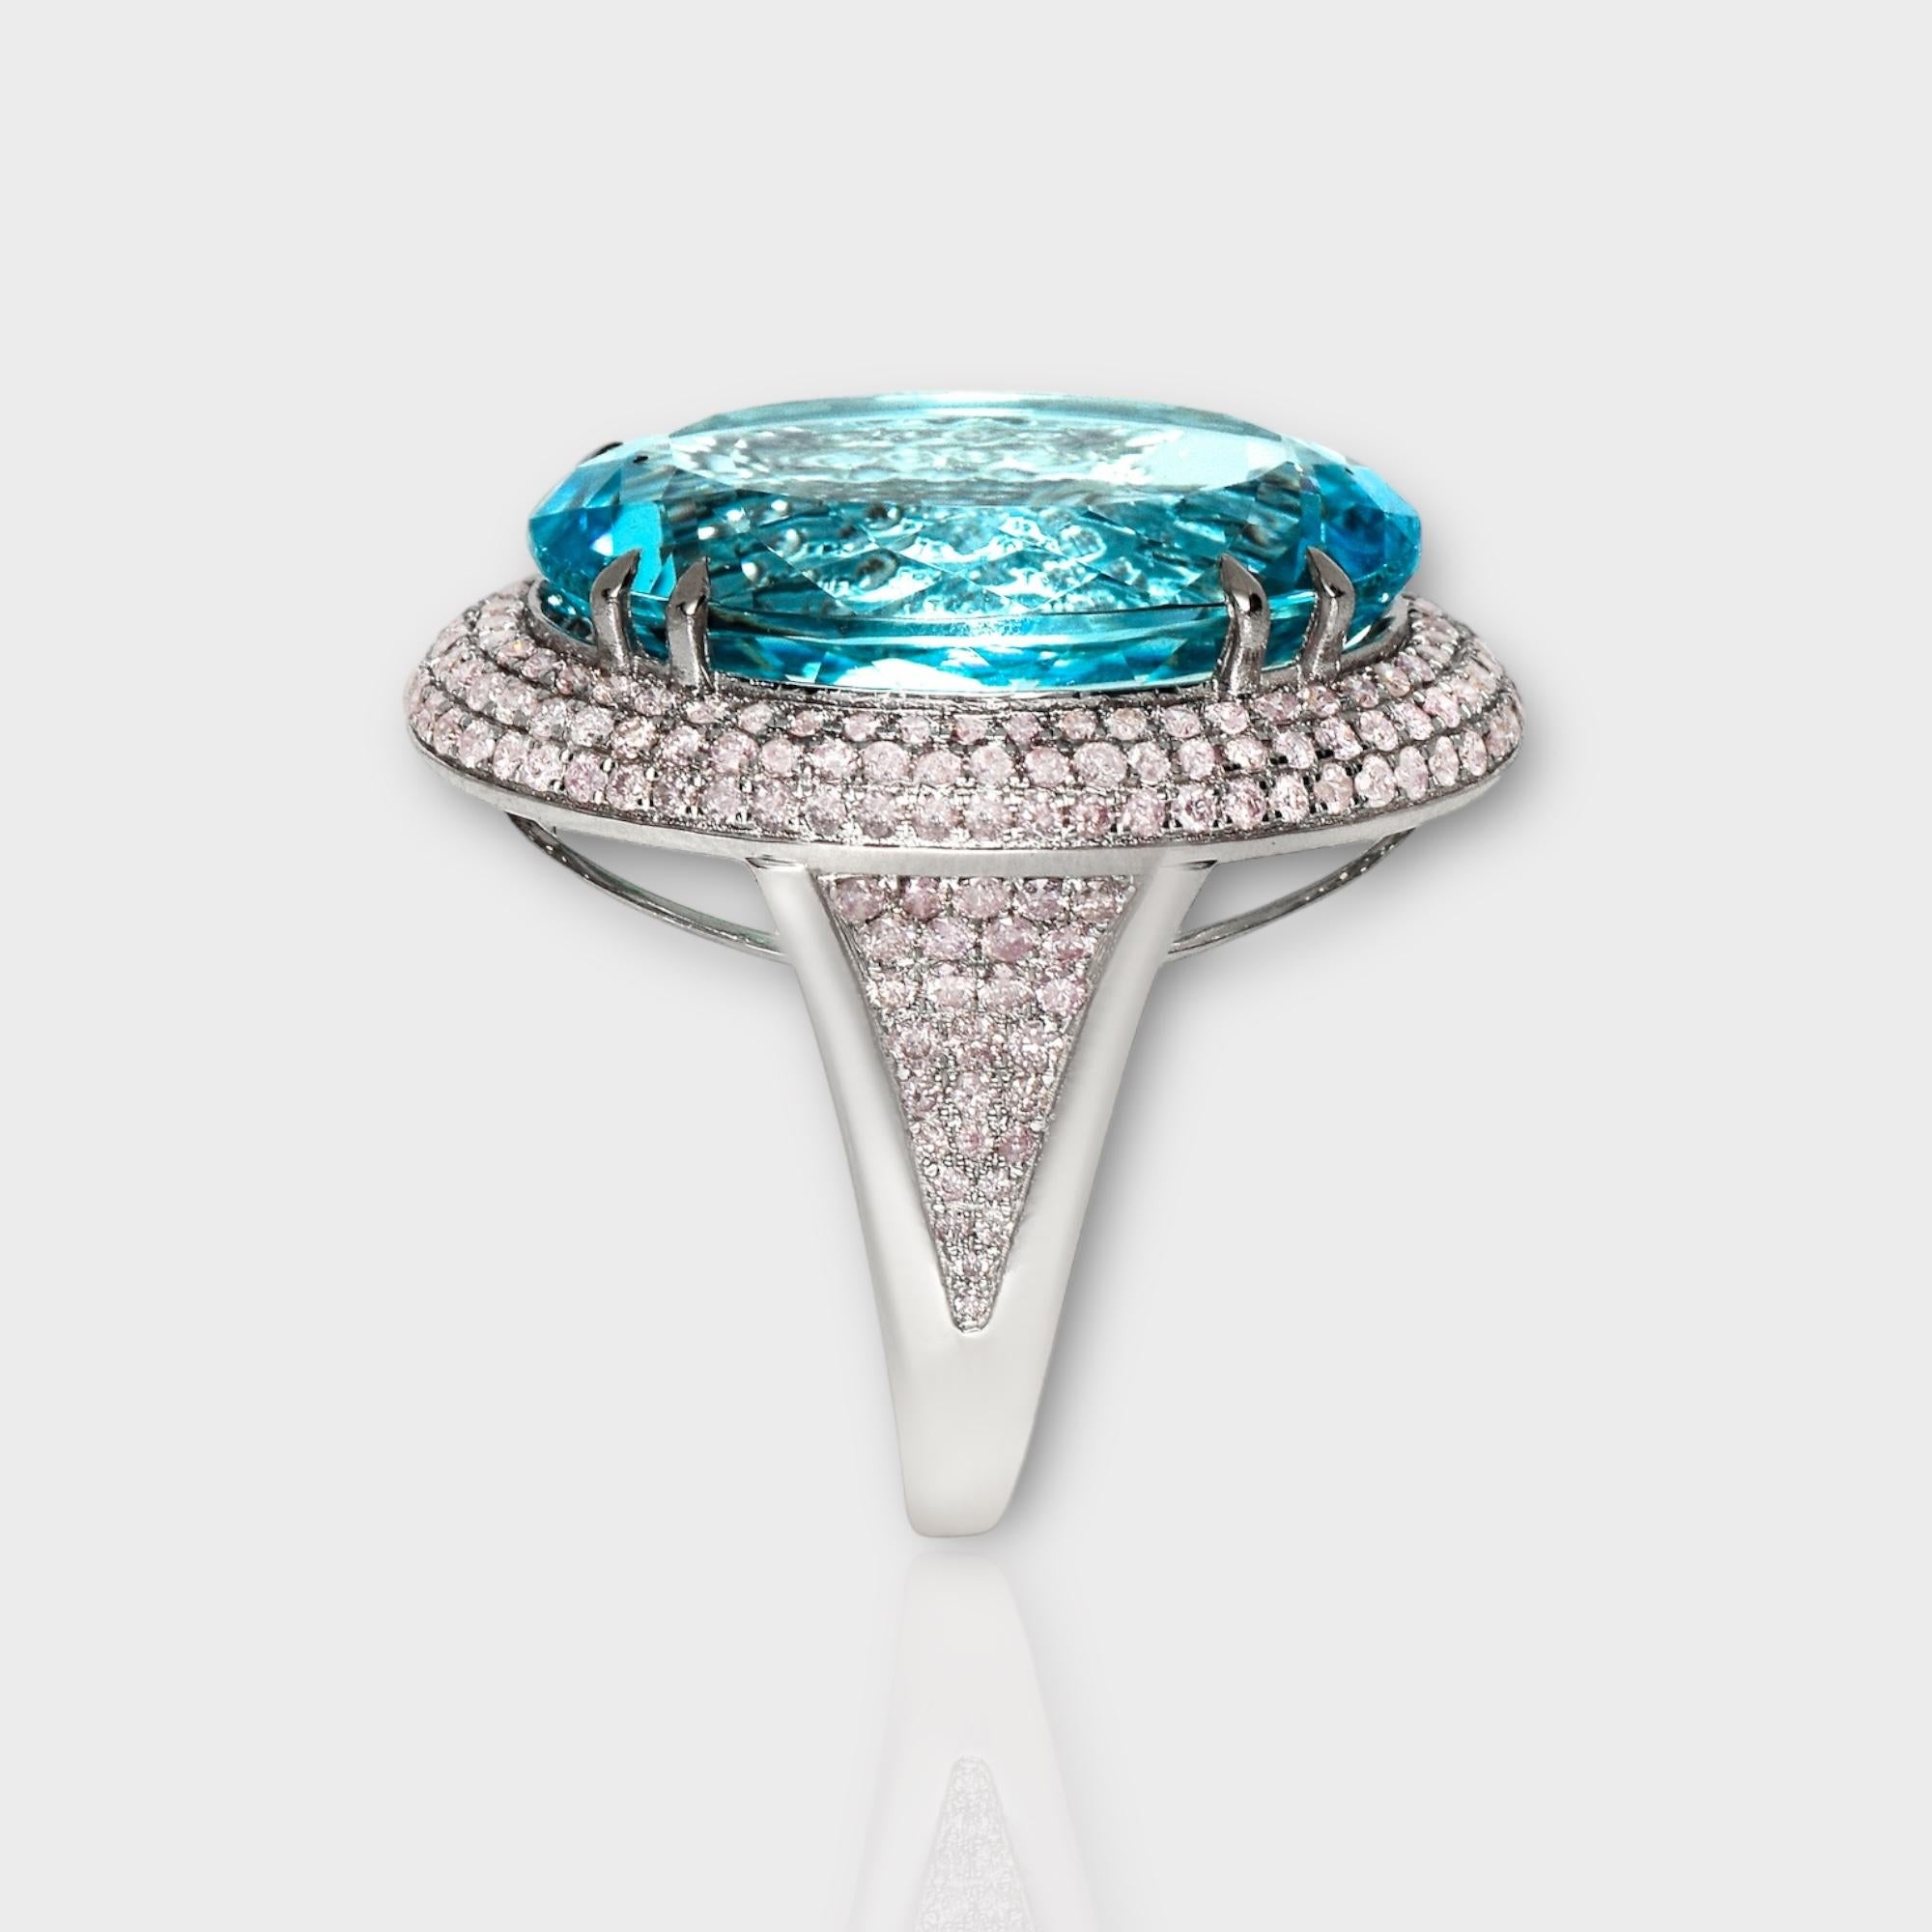 IGI 14K 21.85 Ct Santa Maria Blue Aquamarine&Pink Diamonds Cocktail Ring In New Condition For Sale In Kaohsiung City, TW